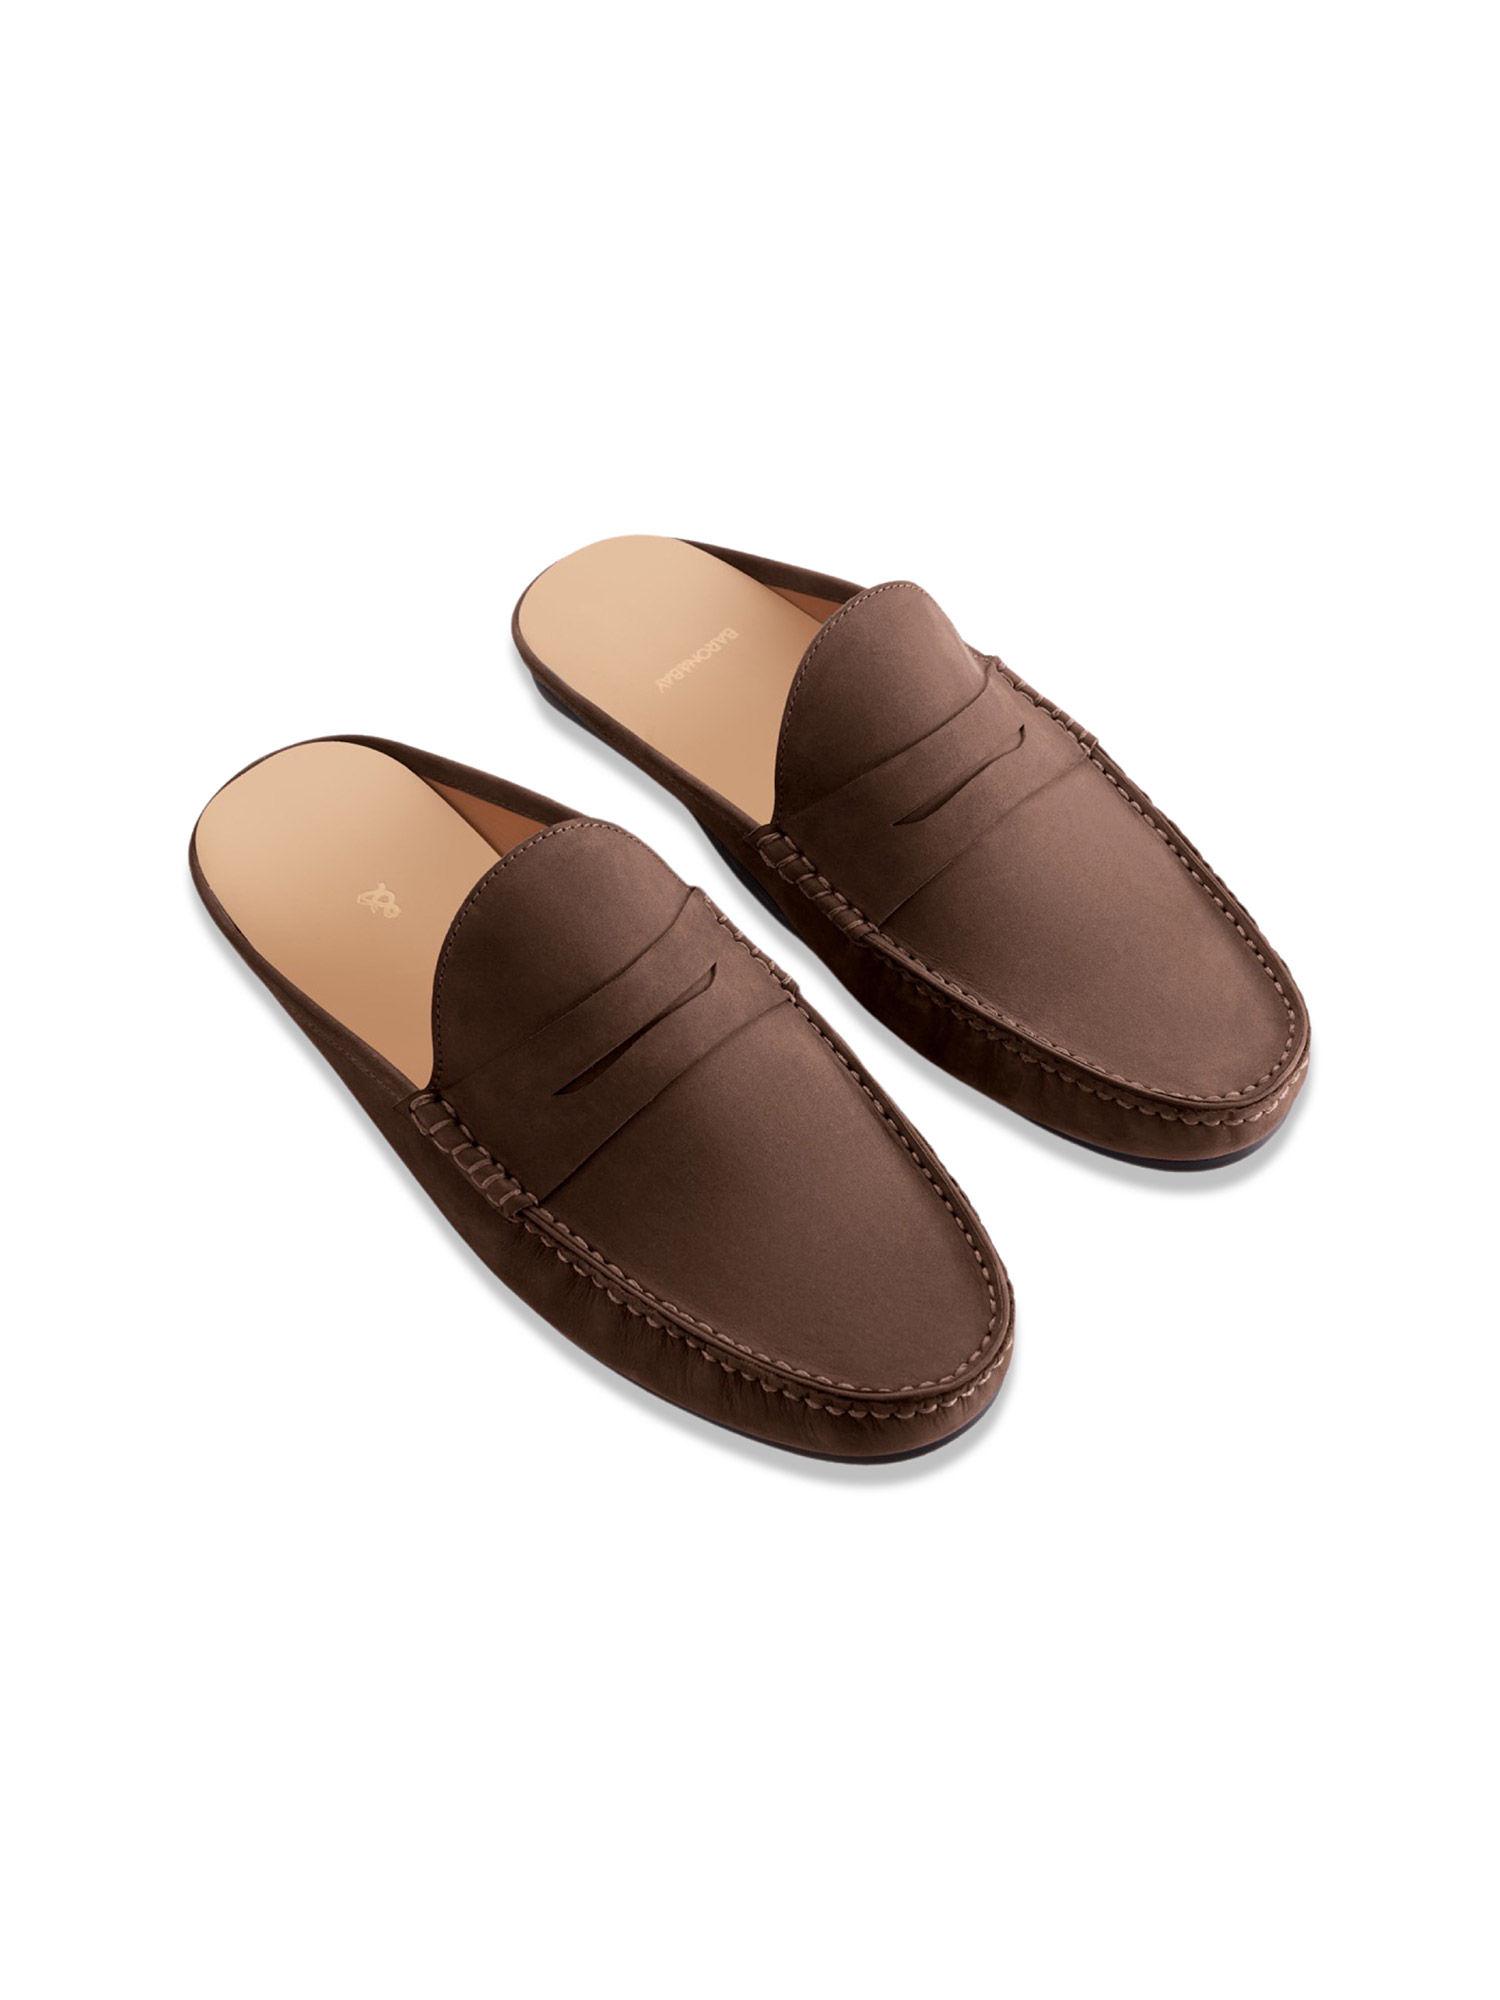 arno nubuck backless brown casual mules